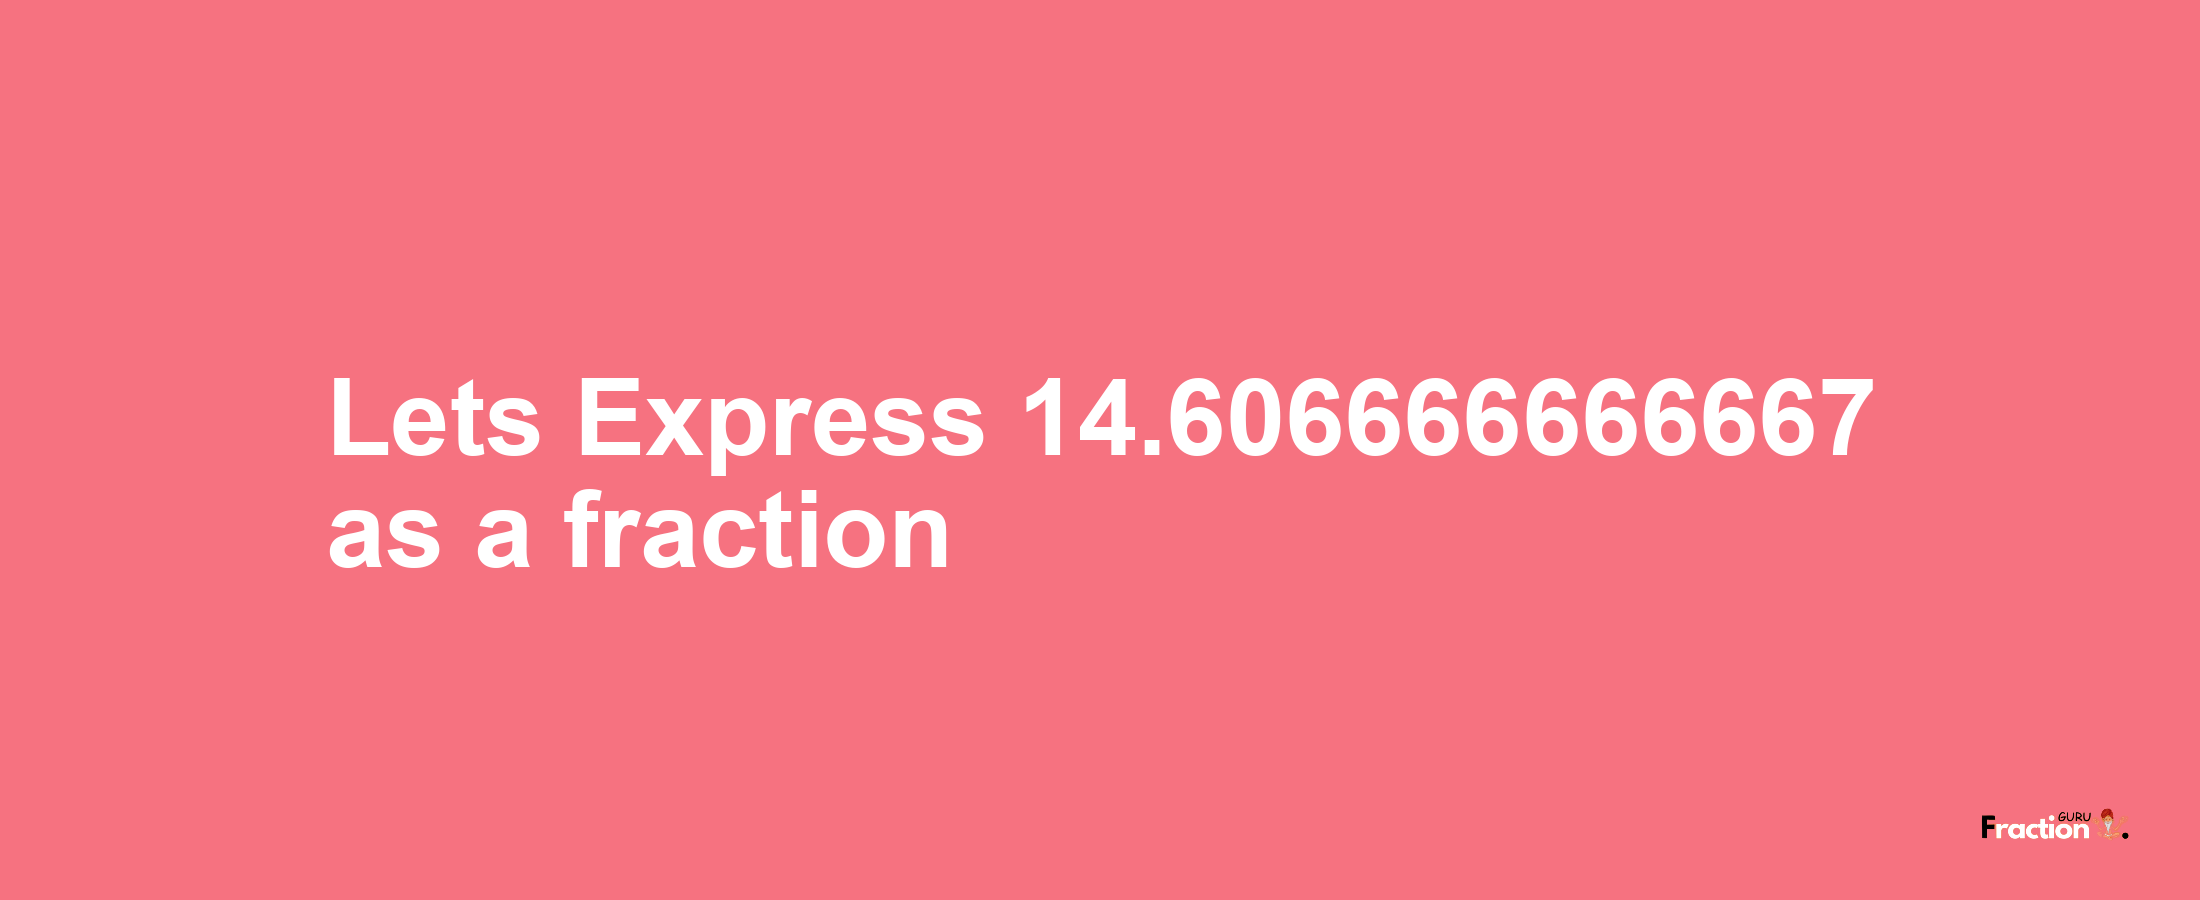 Lets Express 14.606666666667 as afraction